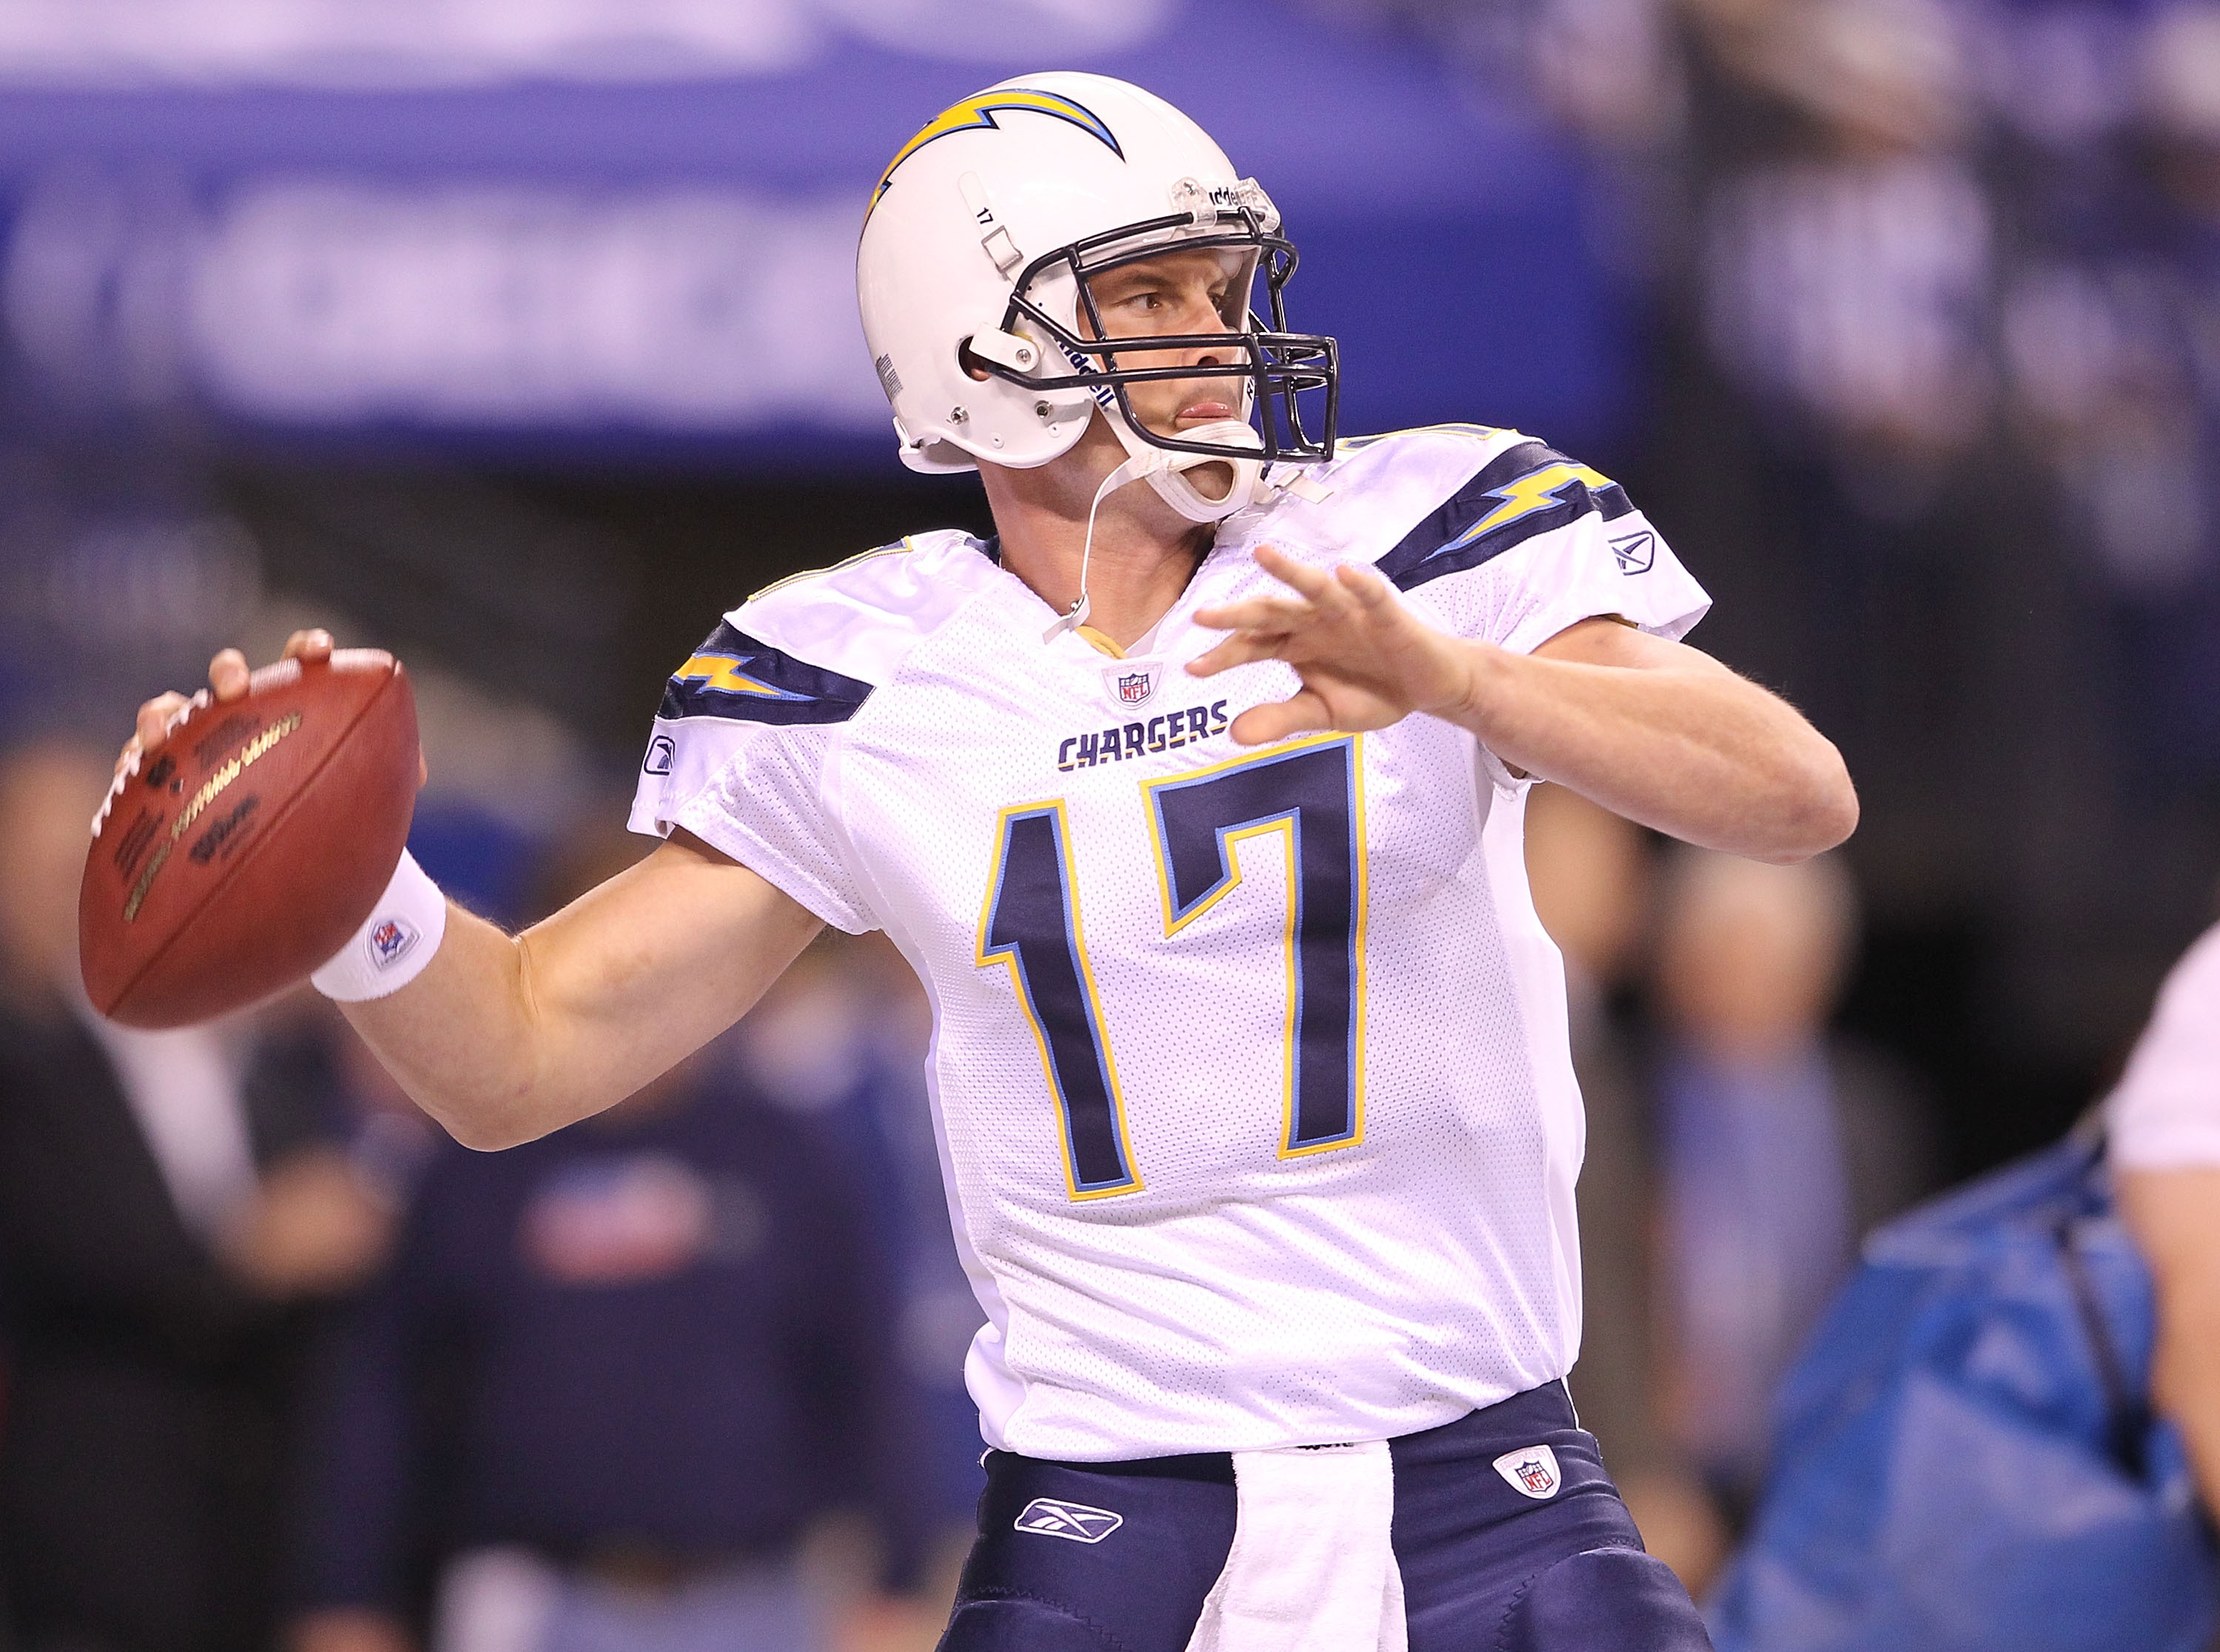 INDIANAPOLIS - NOVEMBER 28:  Philip Rivers #17 of the San Diego Chargers throws a pass before the NFL game against the Indianapolis Colts at Lucas Oil Stadium on November 28, 2010 in Indianapolis, Indiana.  (Photo by Andy Lyons/Getty Images)